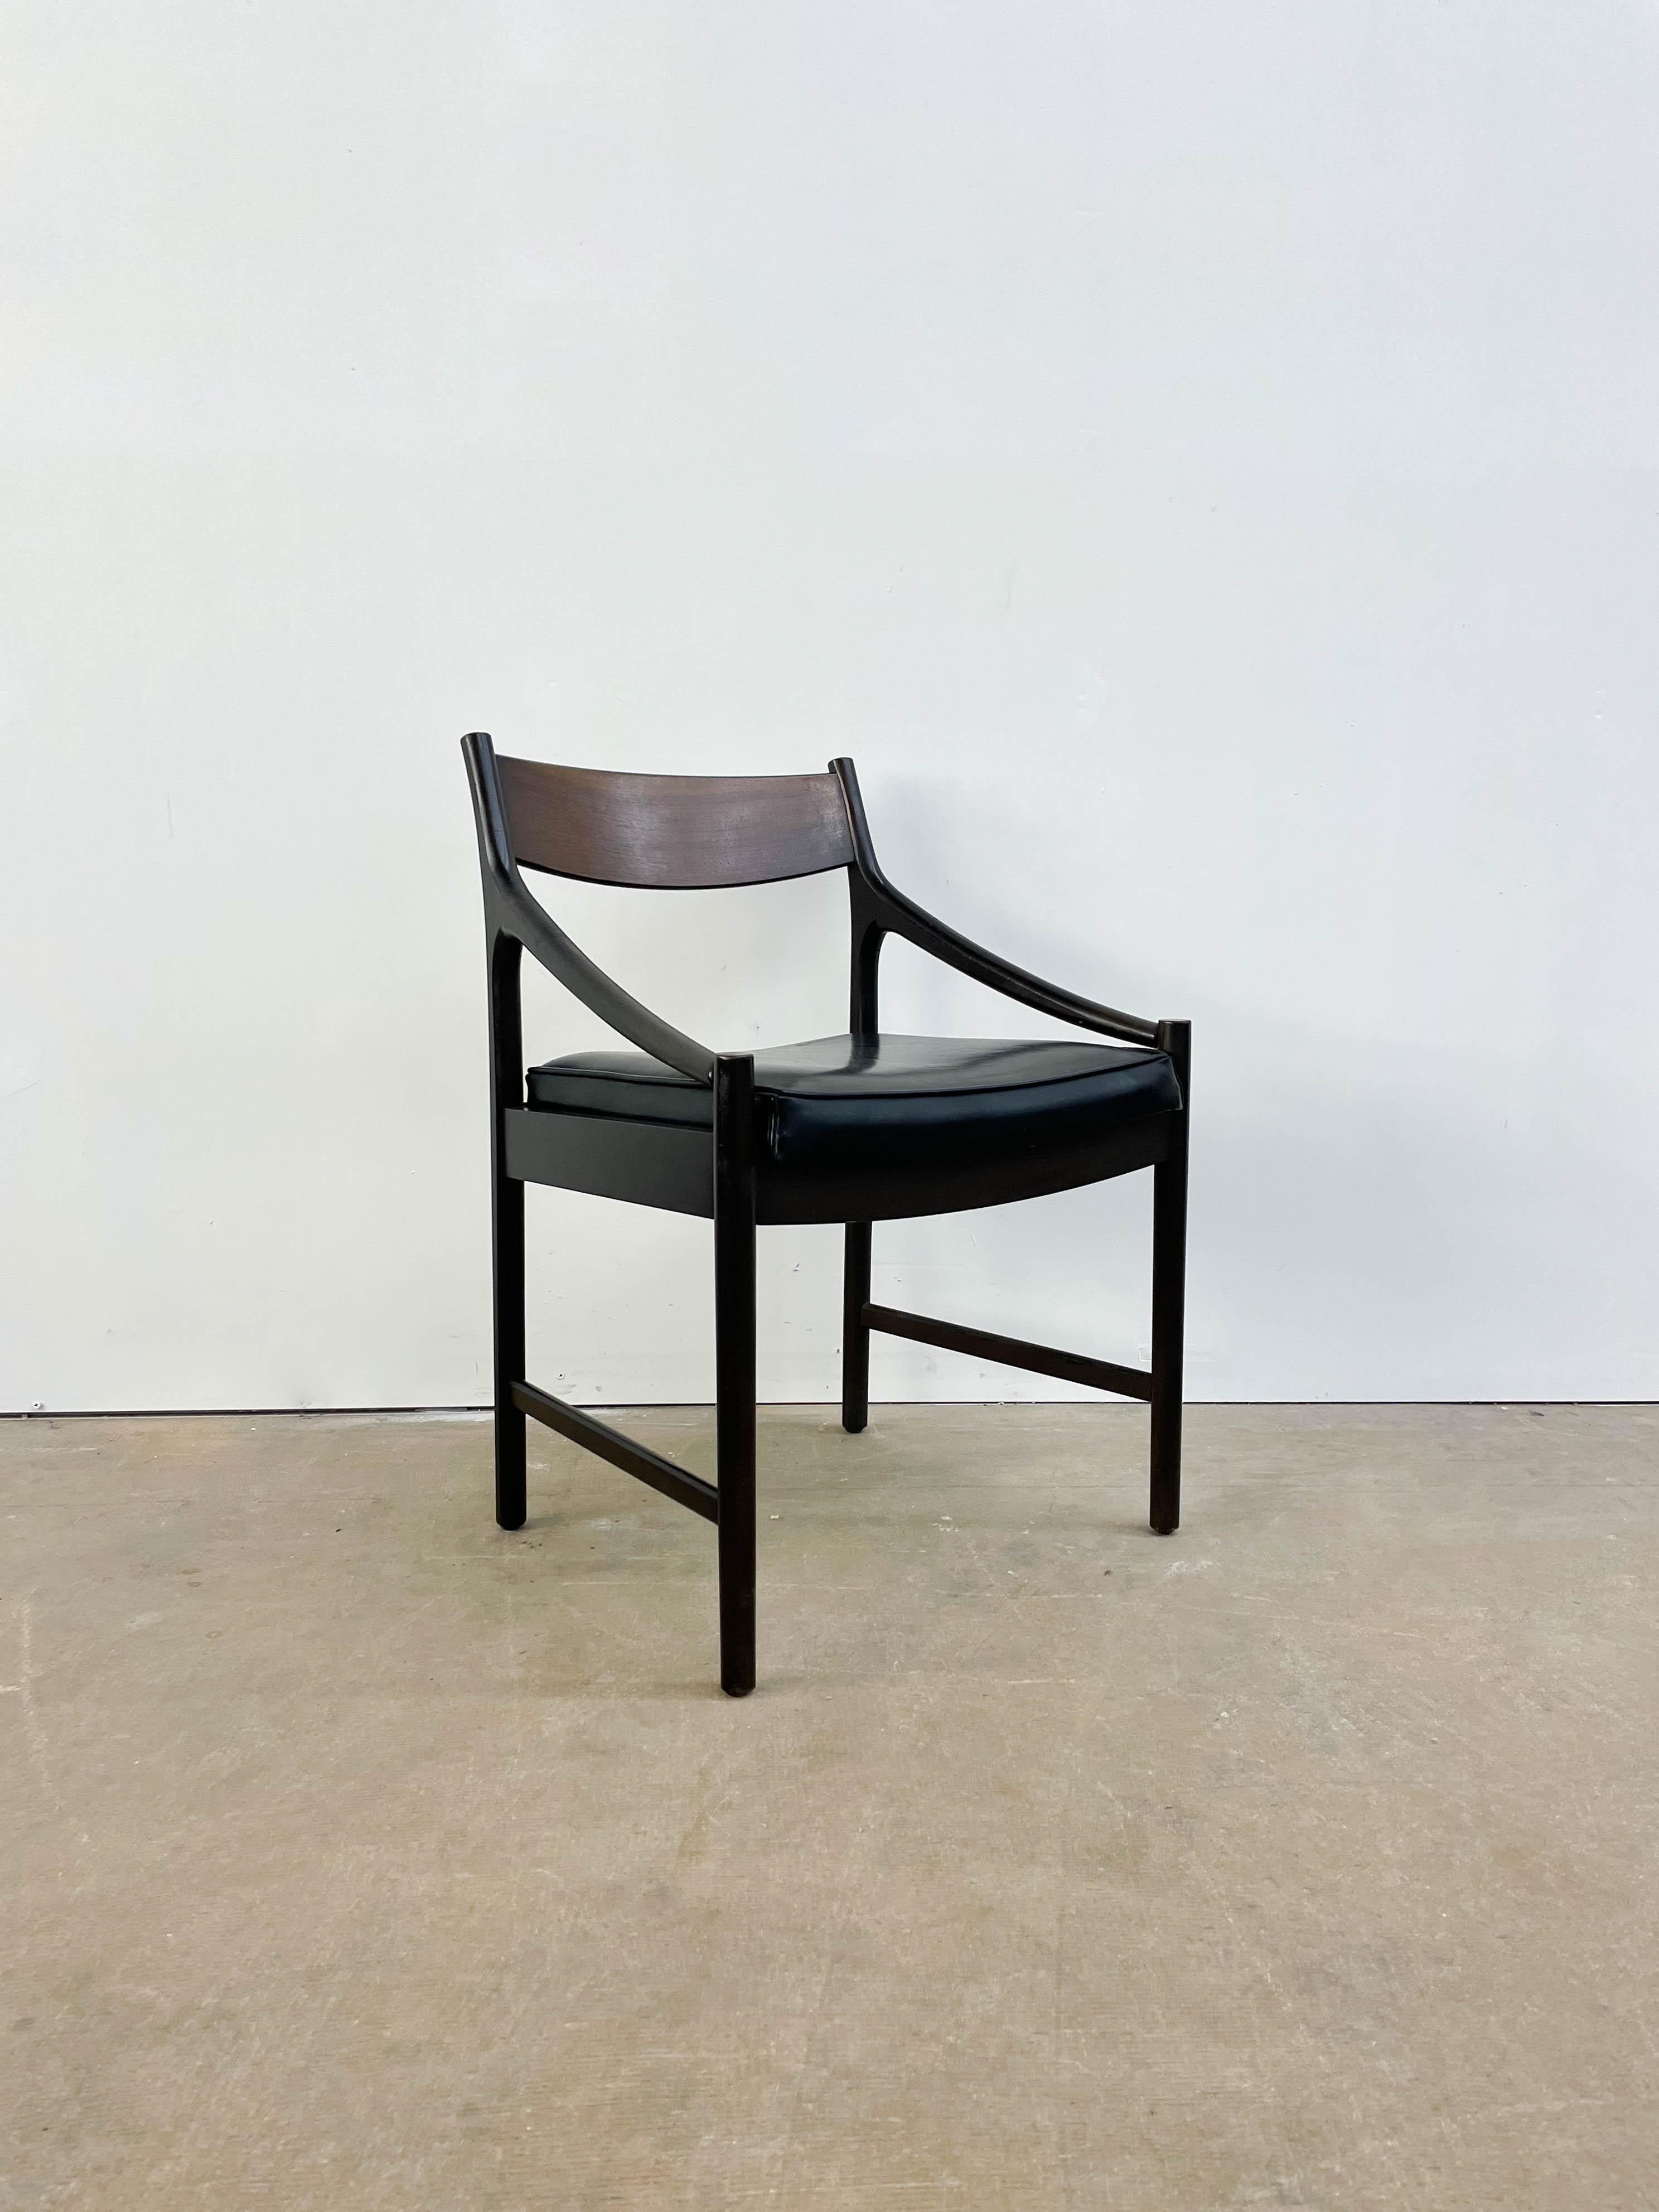 Superb and rare armchair by Michael Van Beuren for his company, made in Mexico in the 1960s. The beautiful chair boasts a nice combination of woods with a stunning teak backrest -- this is not a chair you should keep up against the wall! The